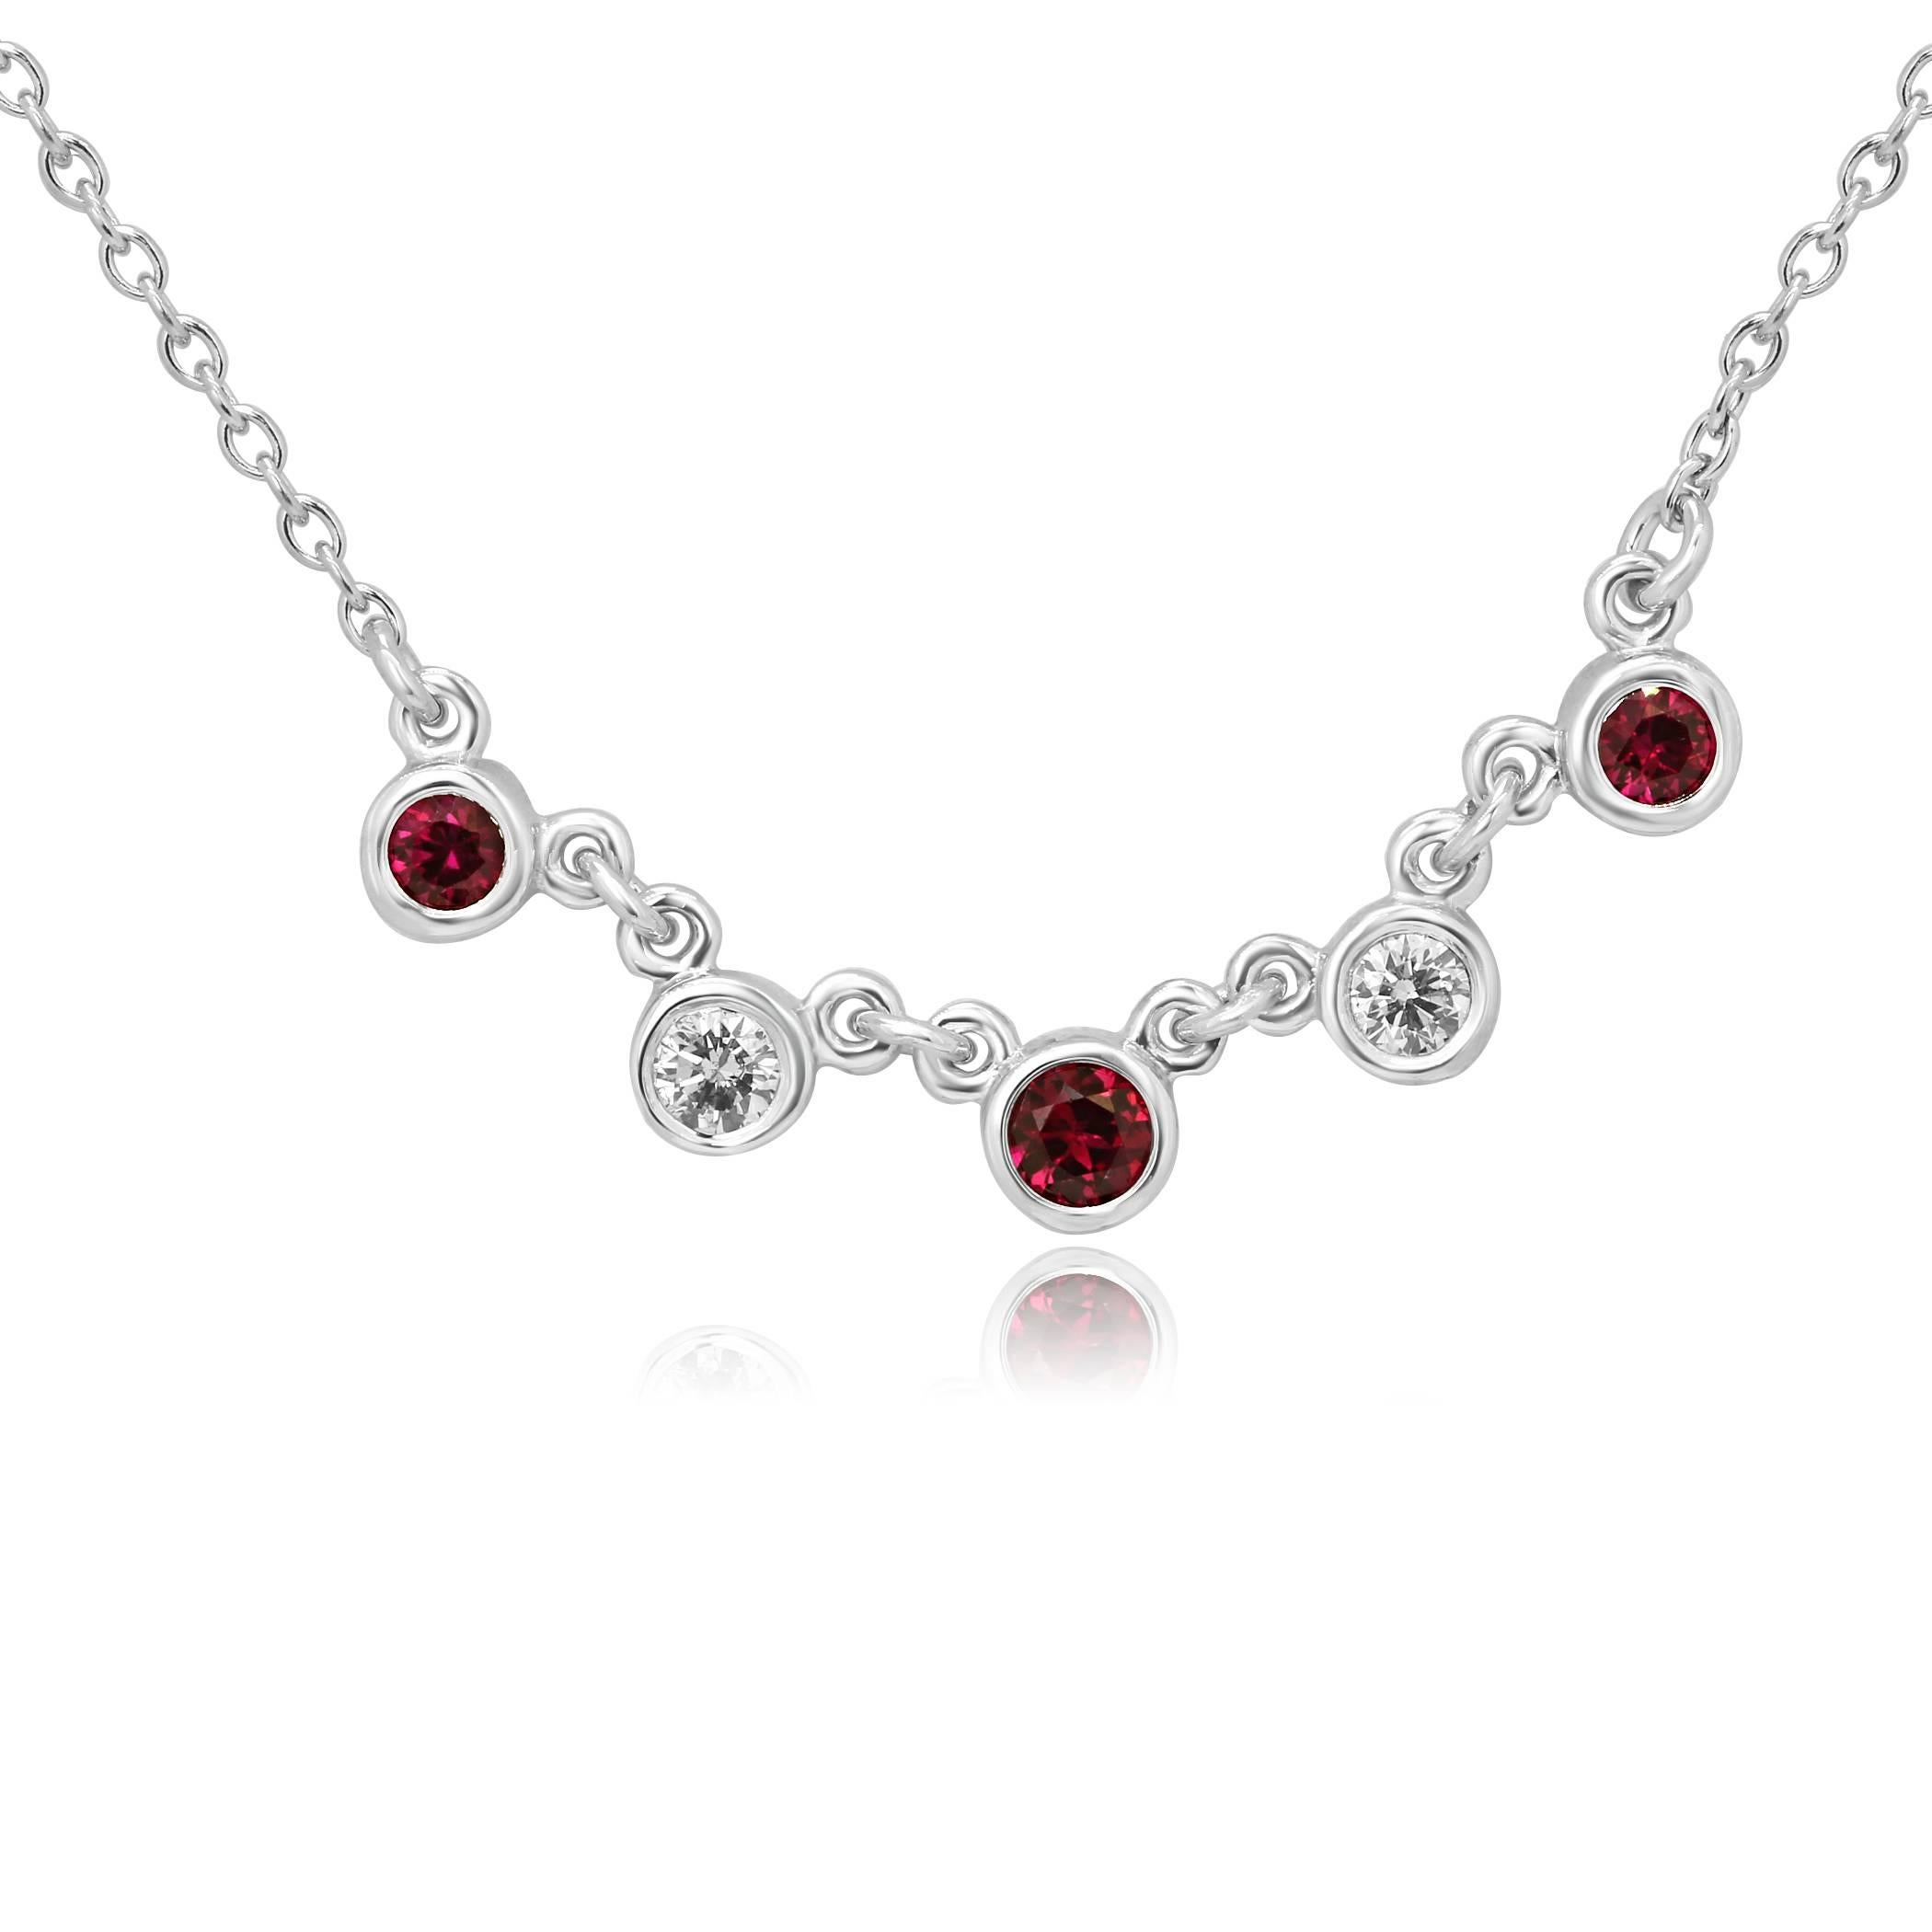 3 Ruby Rounds 0.40 Carat with 2 Diamond Rounds in between 0.18 Carat in 14K White Gold Stunning Necklace.

MADE IN USA
Total Stone Weight 0.58 Carat